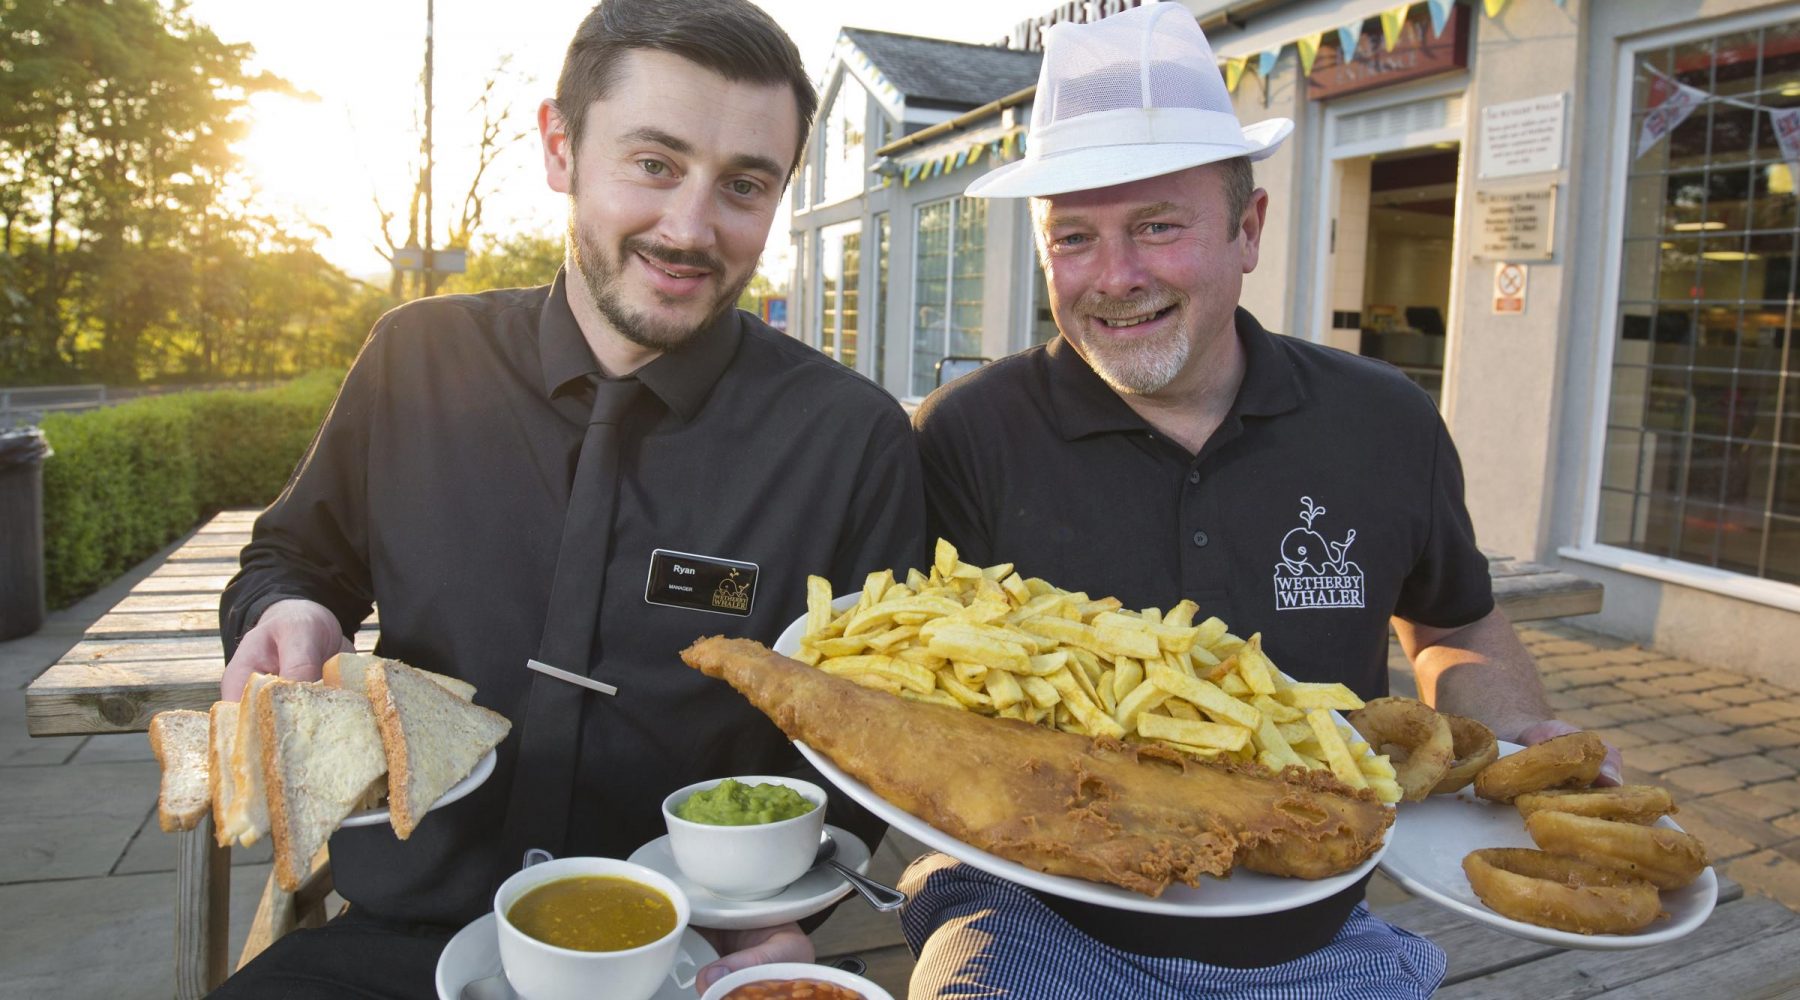 Local chippy named one of the UK's top…